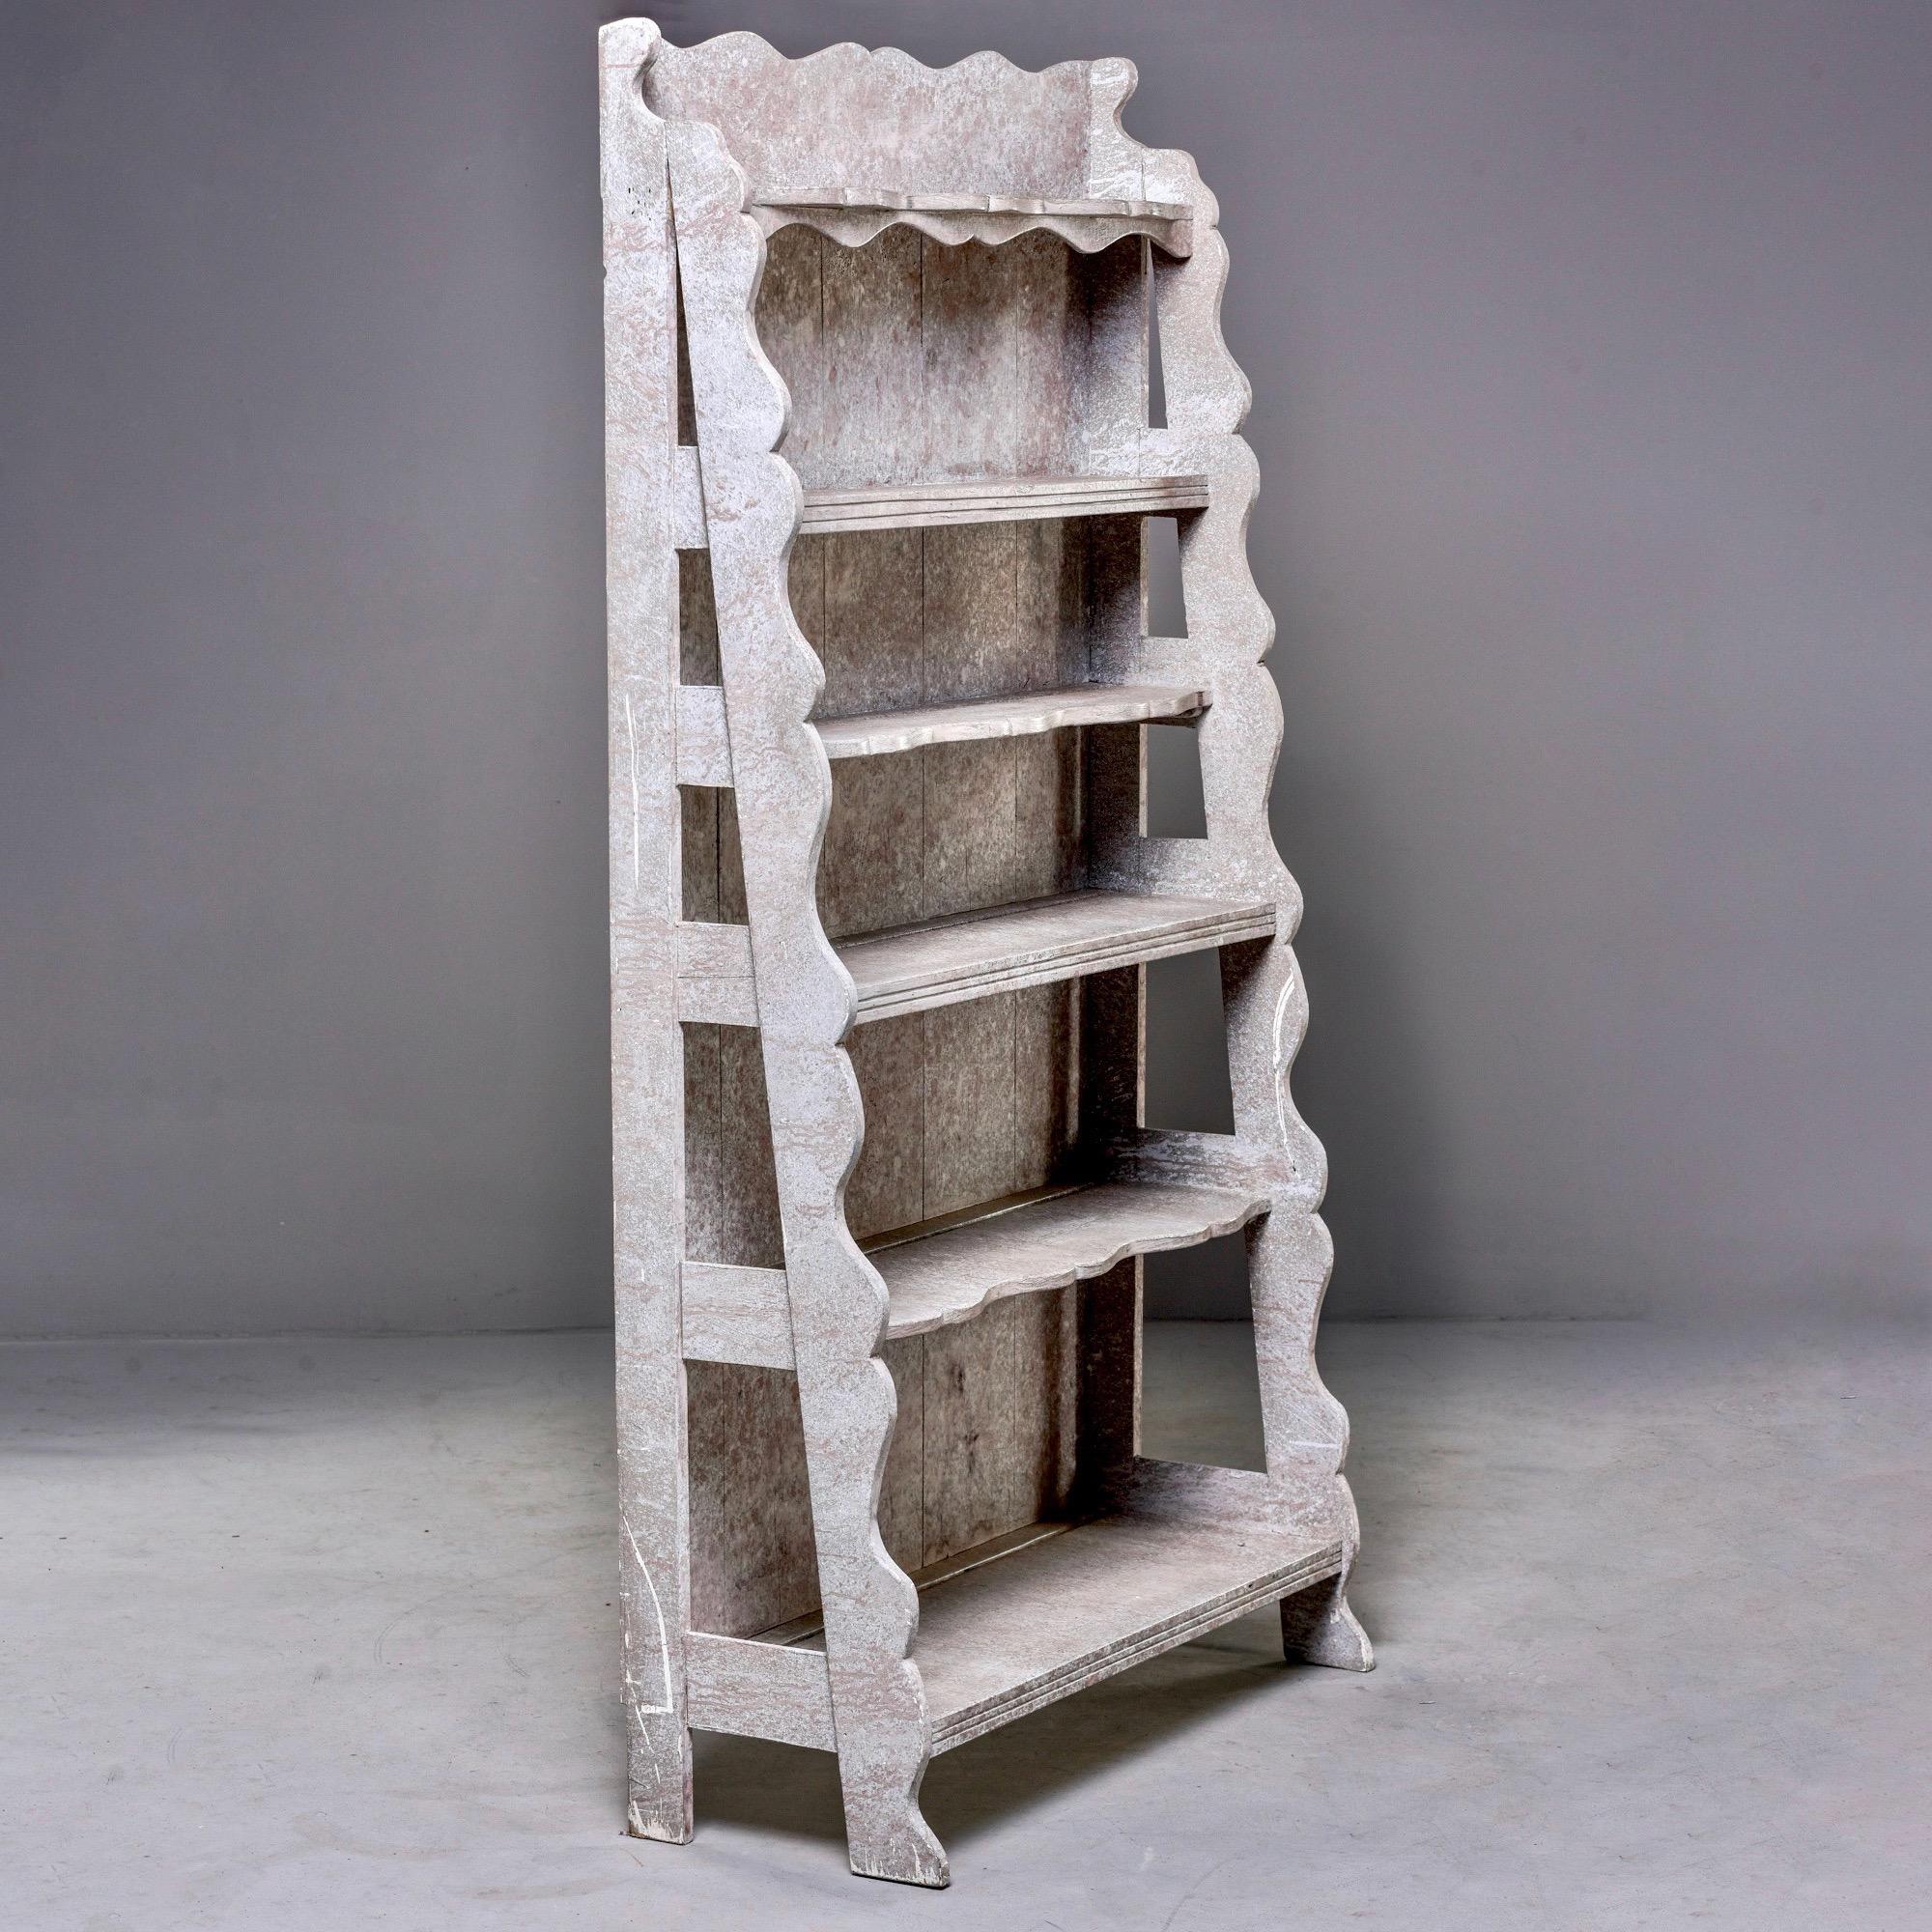 Freestanding painted wood shelf unit with loads of French style found in England, circa 2010. Very sturdy unit has five shelves in graduated height and depth with a footed base, decorative scalloped edges on side supports and top. Gray painted